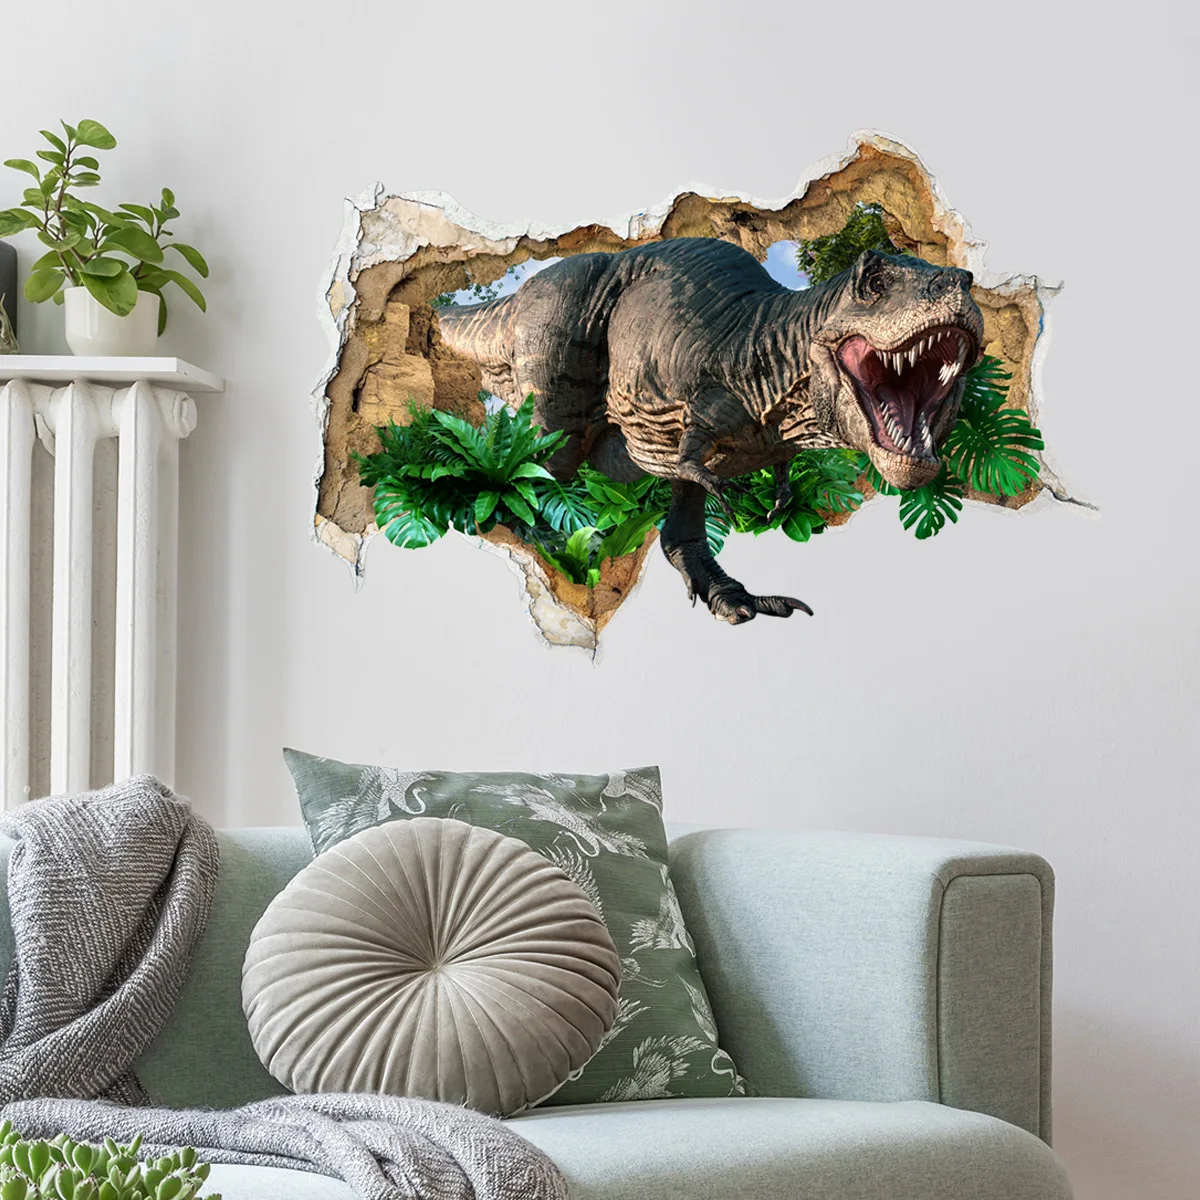 40*60cm Broken Wall Dinosaur Decorative Painting Wall Stickers Background Wall Home Decoration Wall Stickers Wallpaper Atw6009 12 colors 3d walls wallpaper self adhesive diy home decorative soft brick foam protect children bedroom living room wall sticker